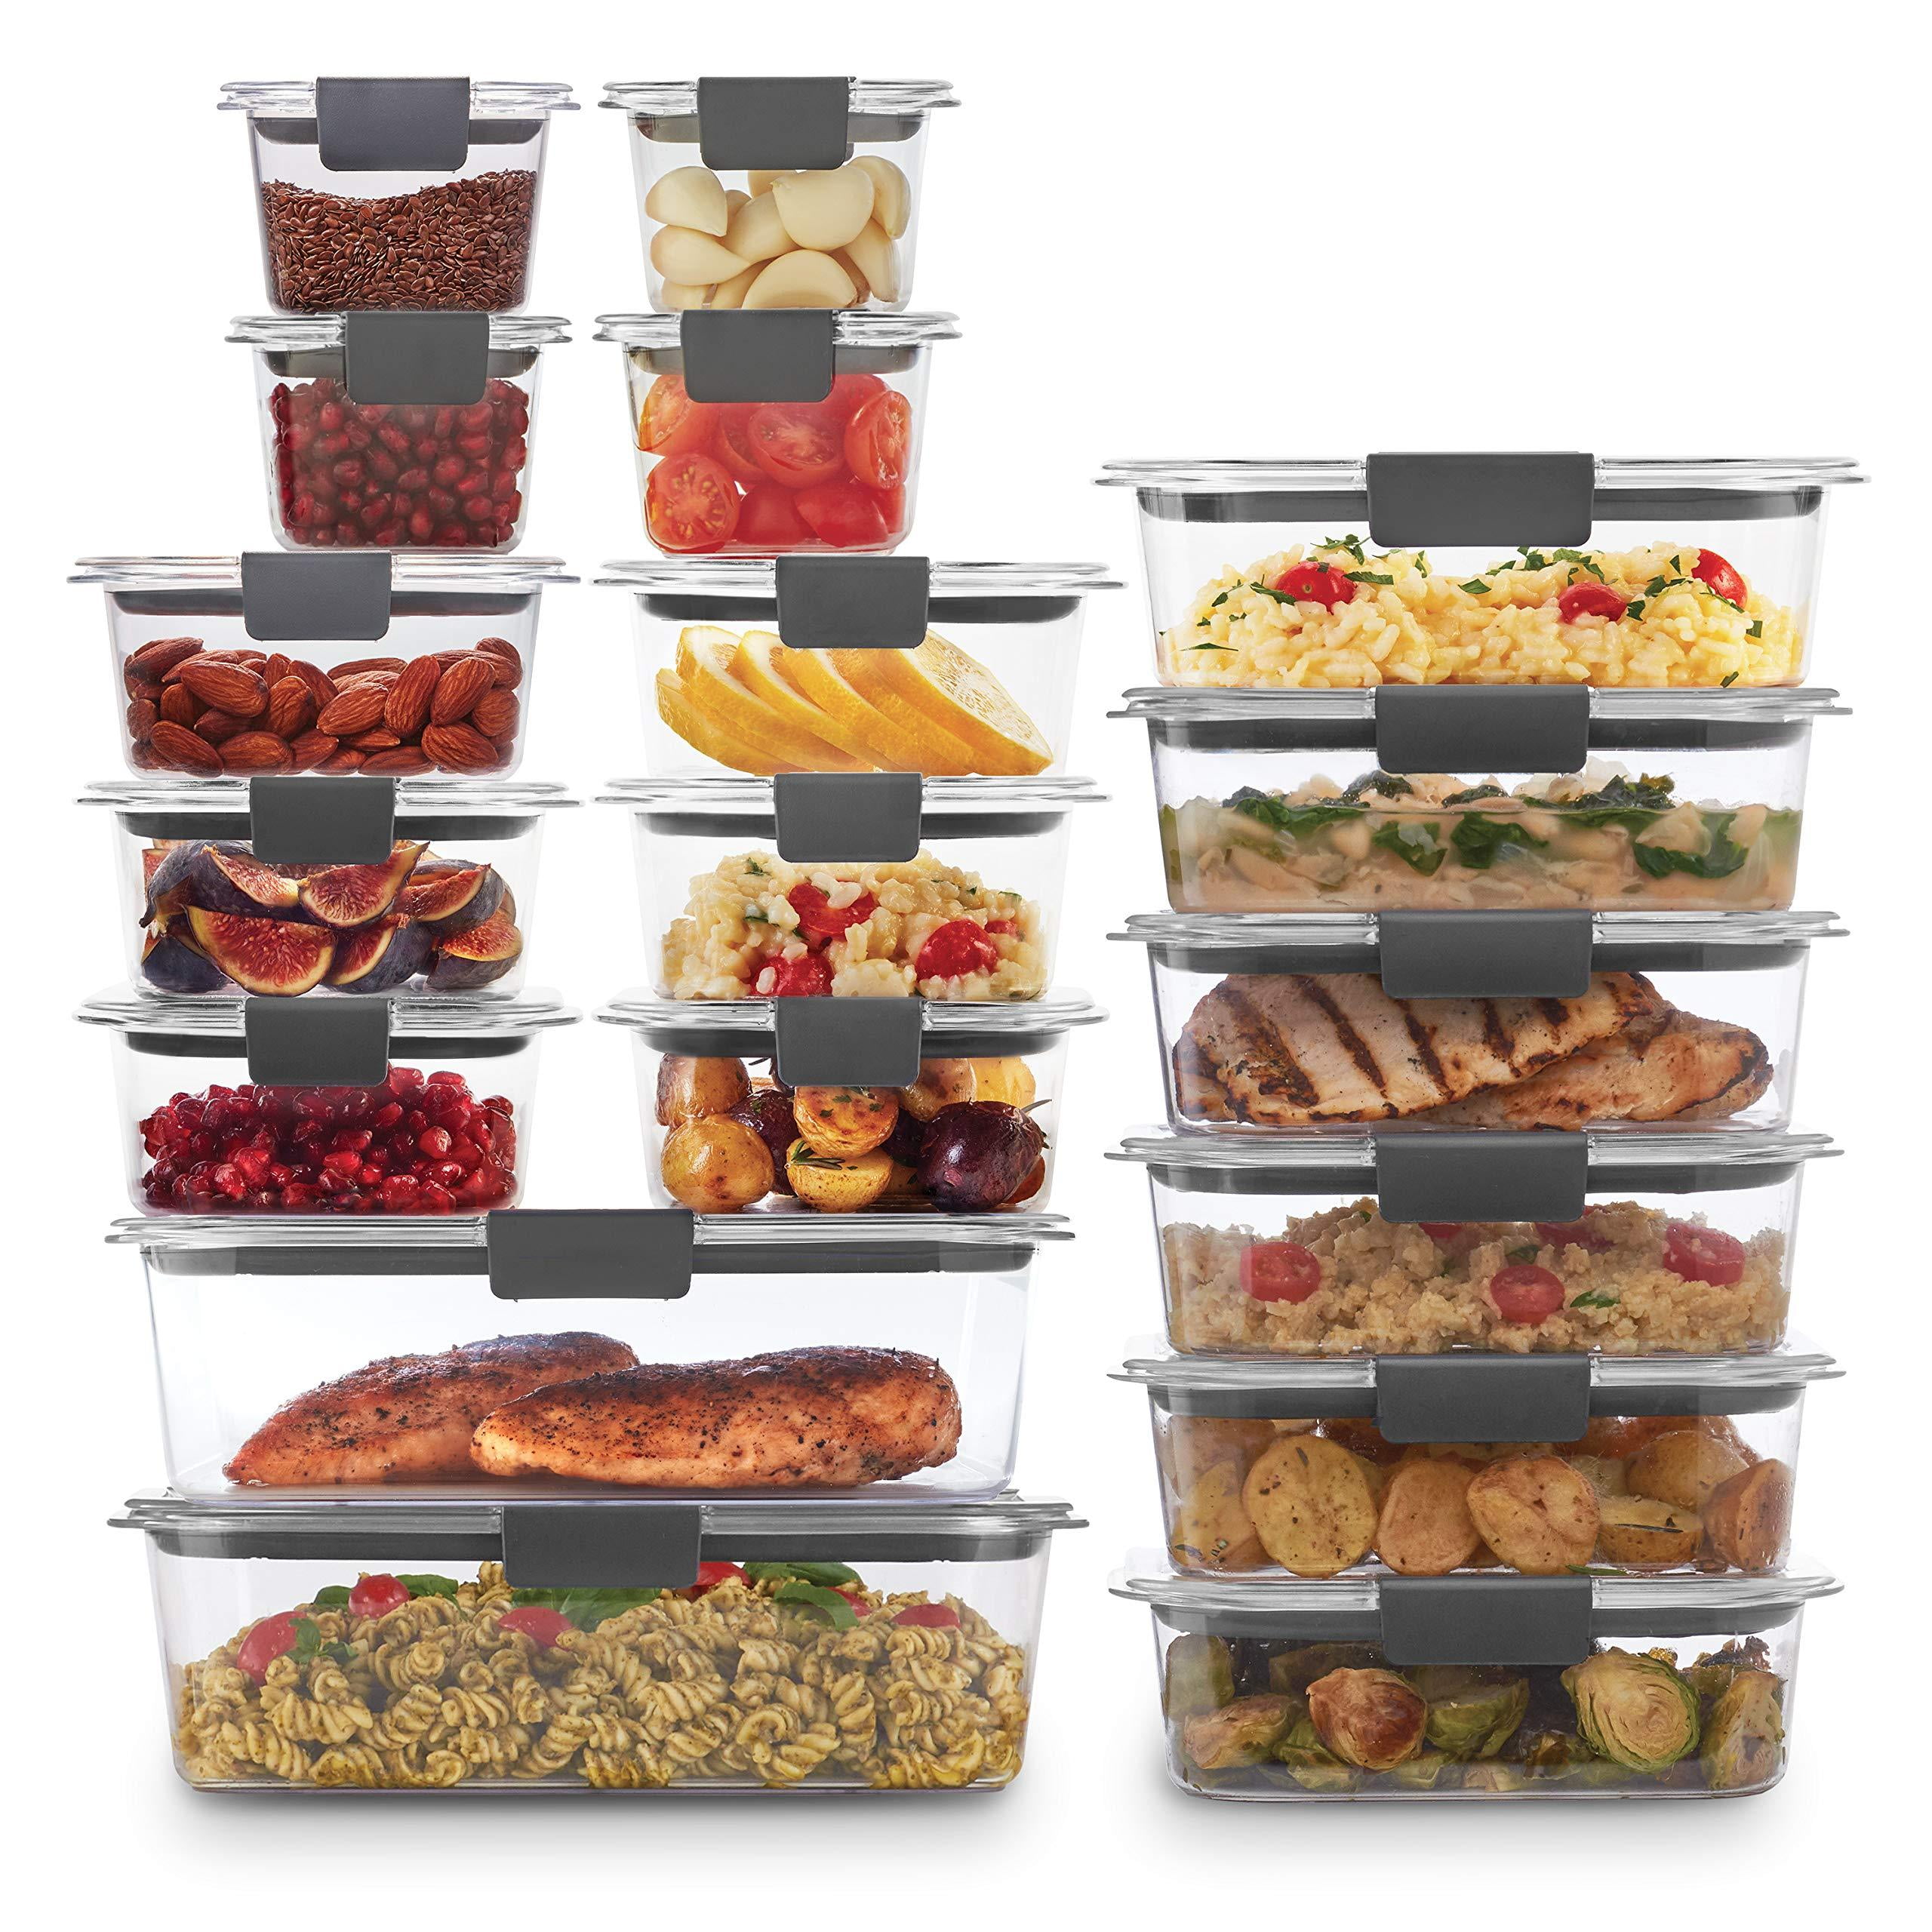 Rubbermaid Brilliance Food Storage Containers, 4.7 Cup, 4 Pack, Leak-Proof, BPA  Free, Clear Tritan Plastic - AliExpress